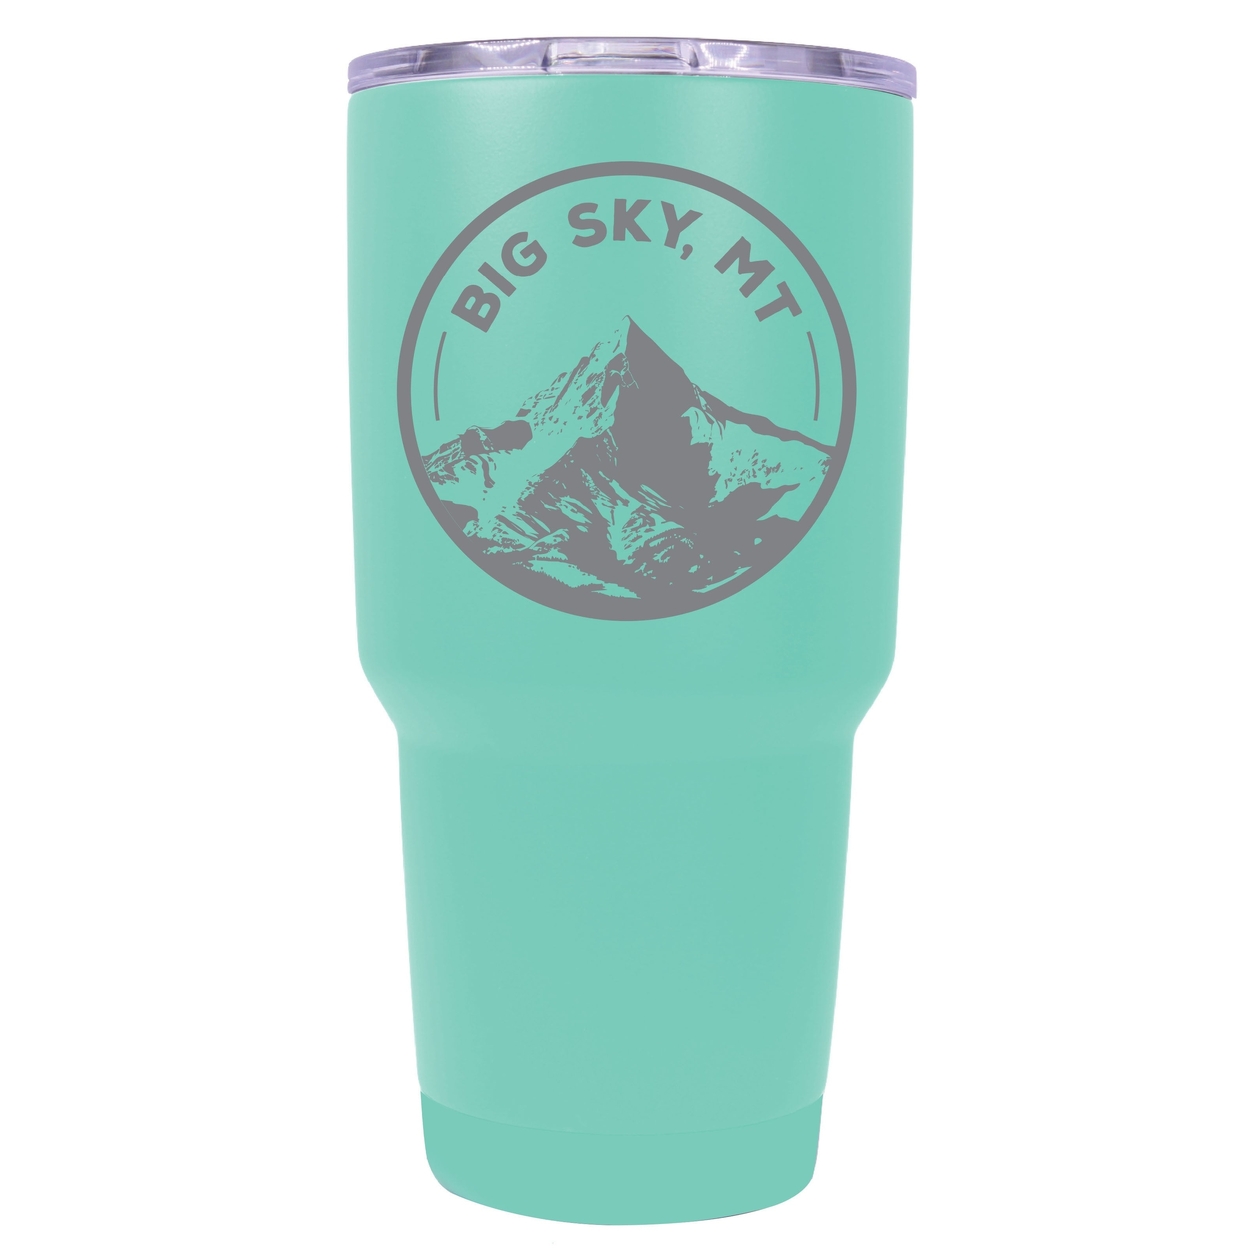 Big Sky Montana Souvenir 24 Oz Engraved Insulated Stainless Steel Tumbler - Seafoam,,2-Pack